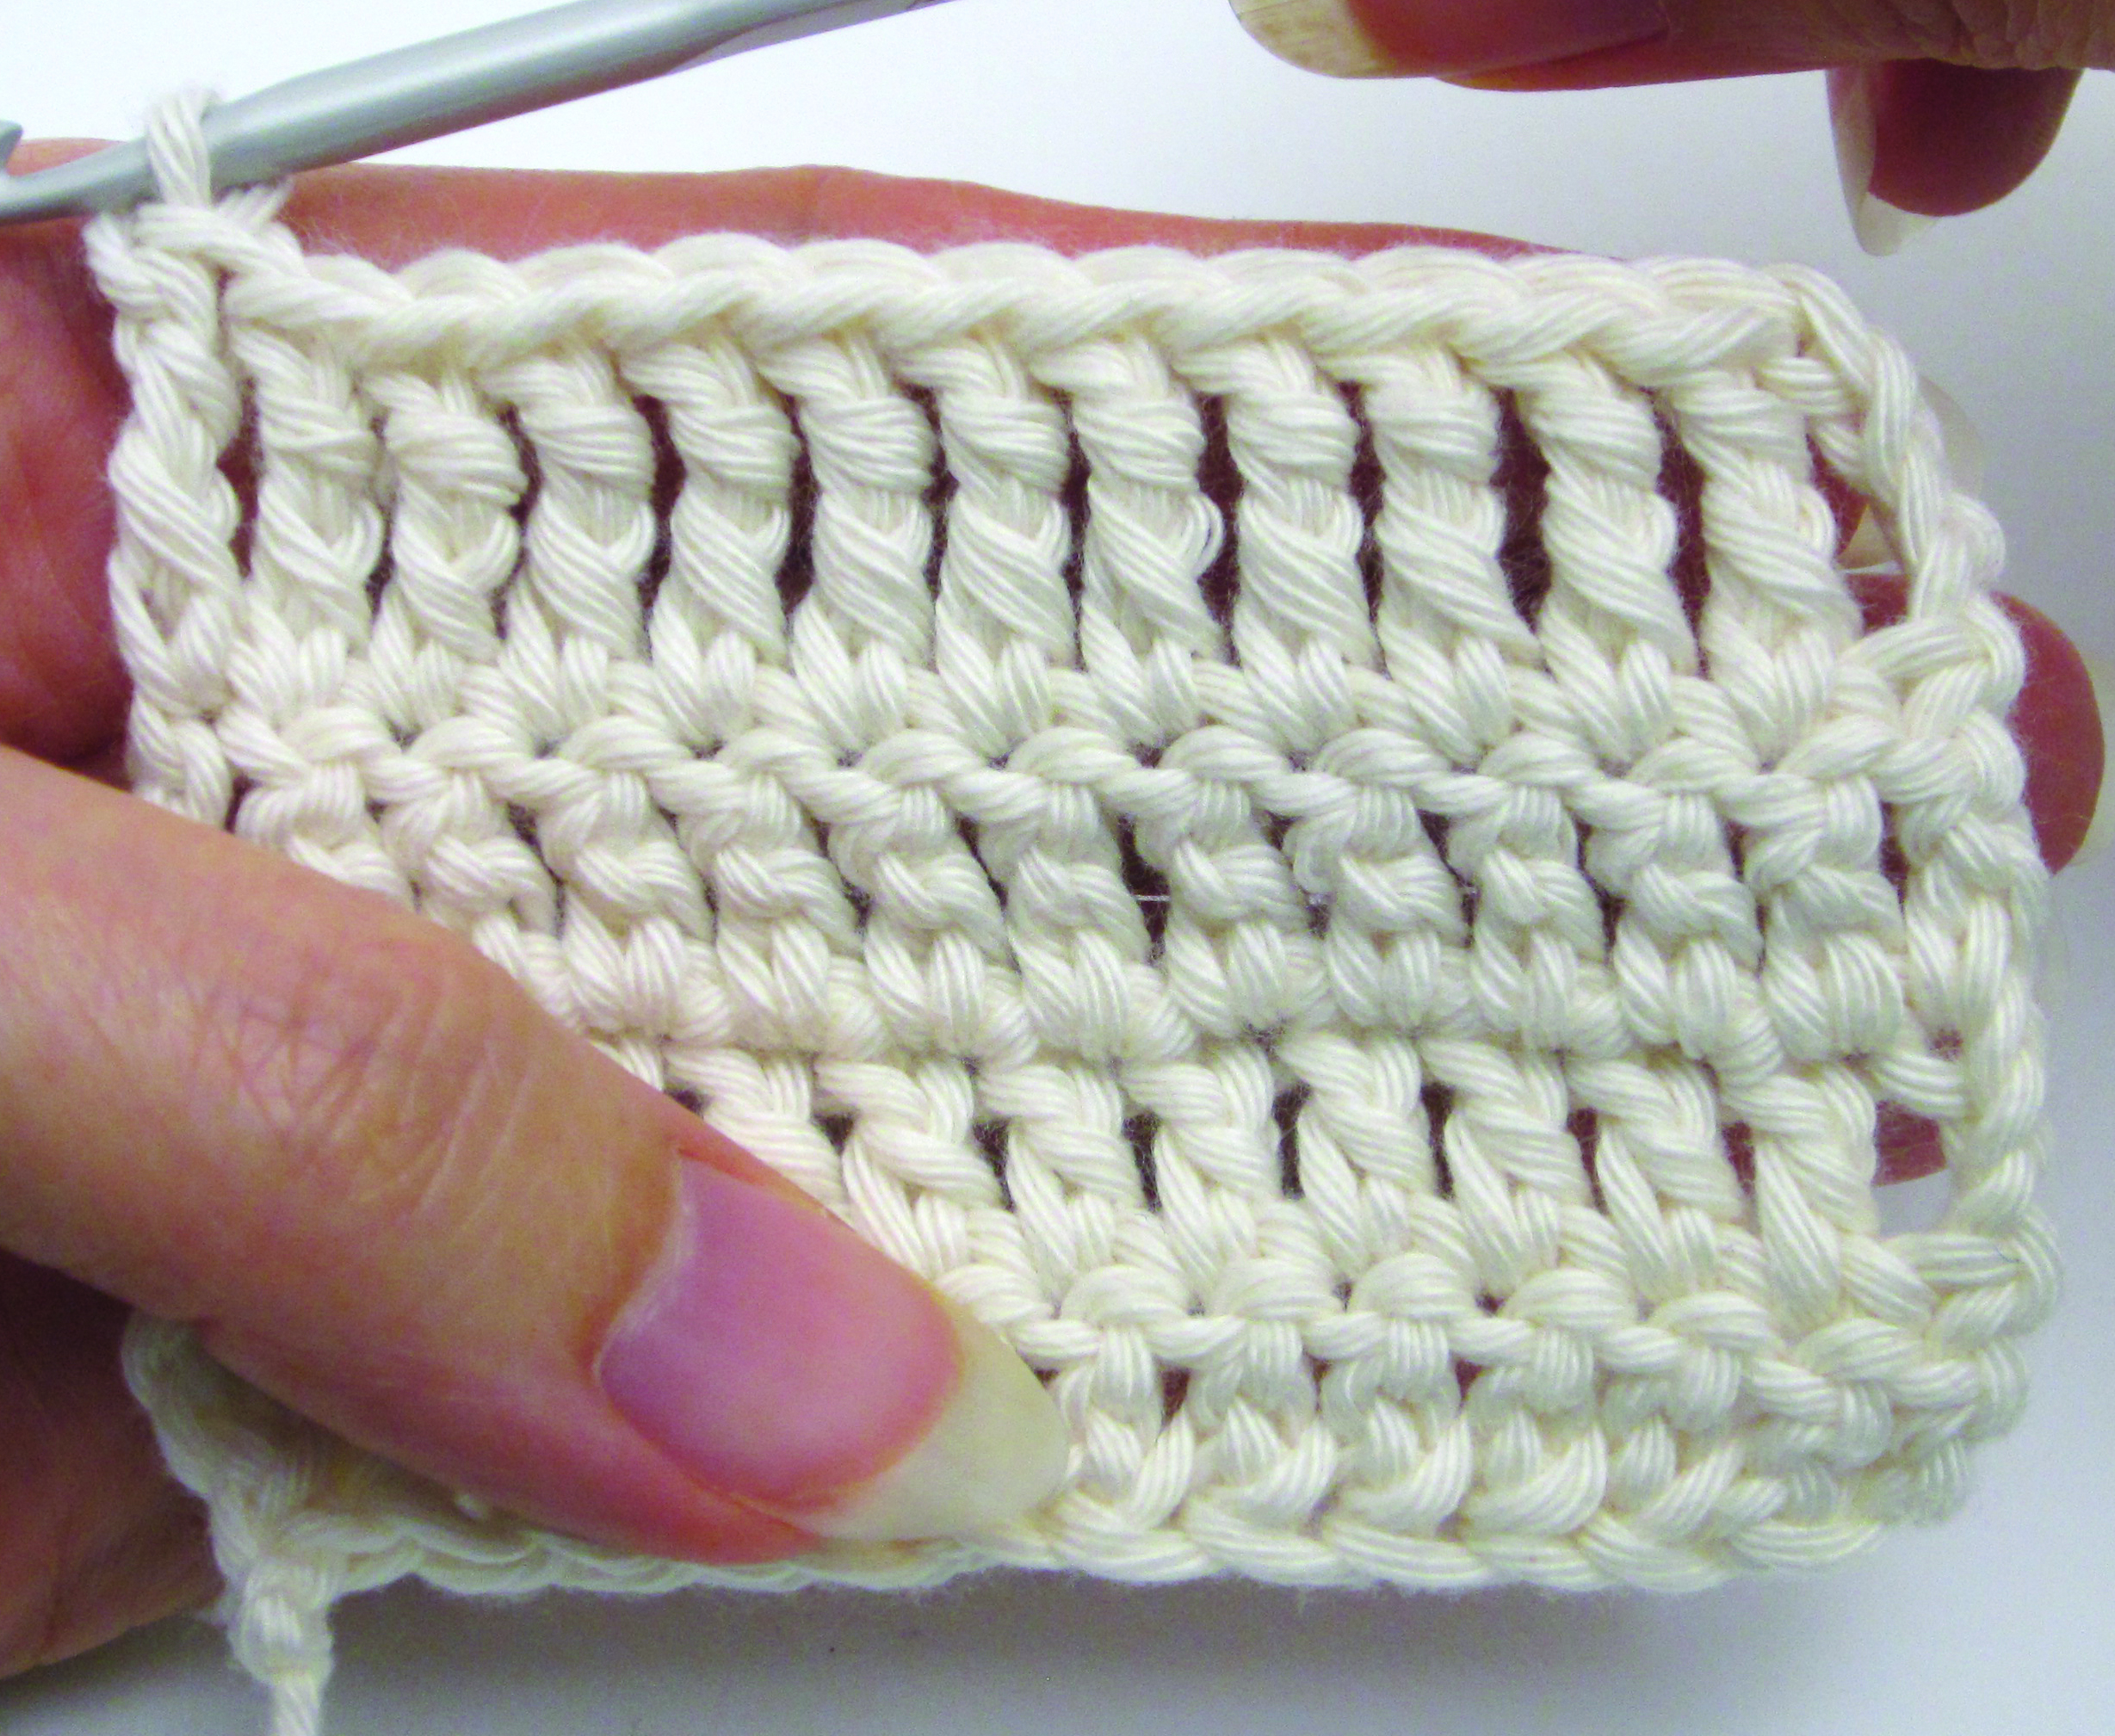 https://c02.purpledshub.com/uploads/sites/51/2022/03/how-to-crochet-extended-stitches-step-09-04bd7f7.jpg